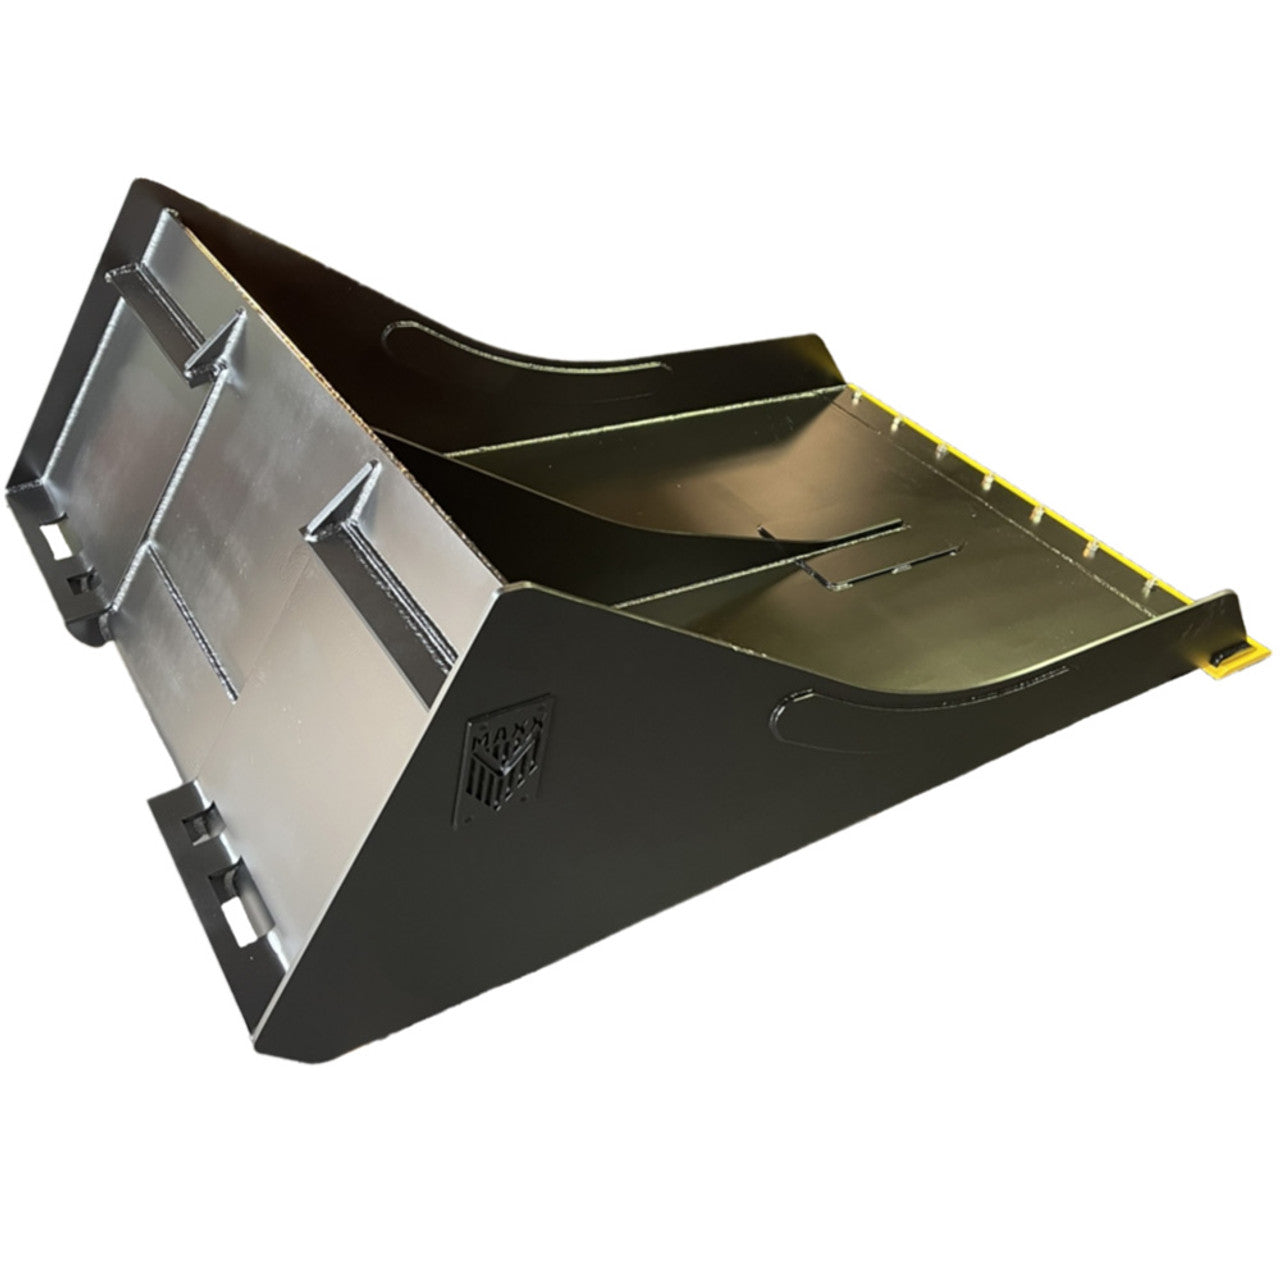 MAXX CONVEYOR CLEANING BUCKET WITH BOLT-ON CUTTING EDGES FOR SKID STEER